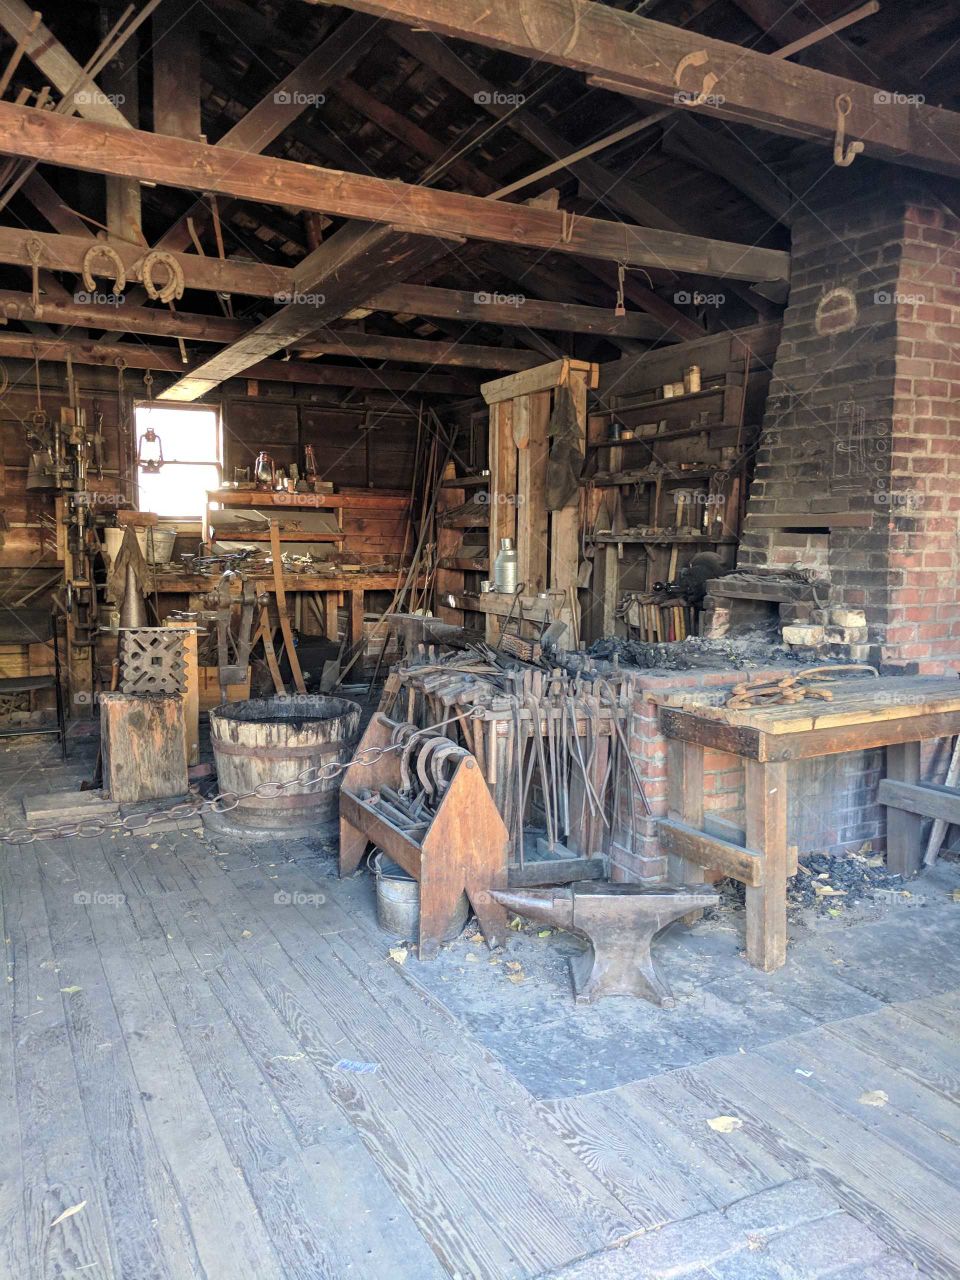 Old fashioned blacksmith shop in great condition